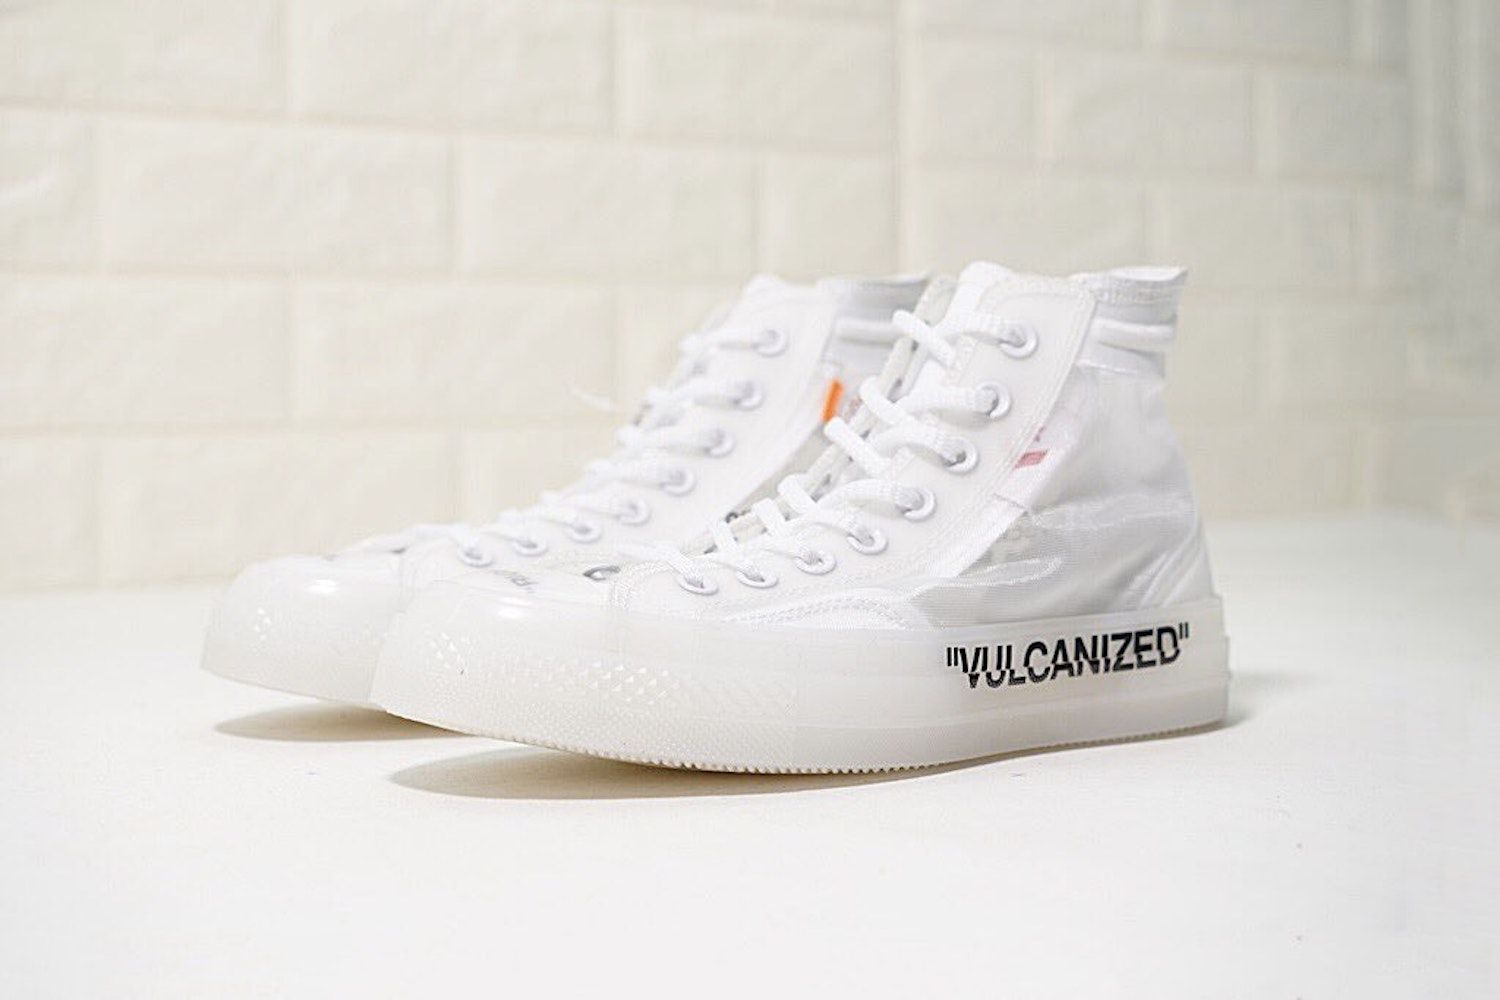 absurd bodsøvelser . It is this the new Converse x Off-White?